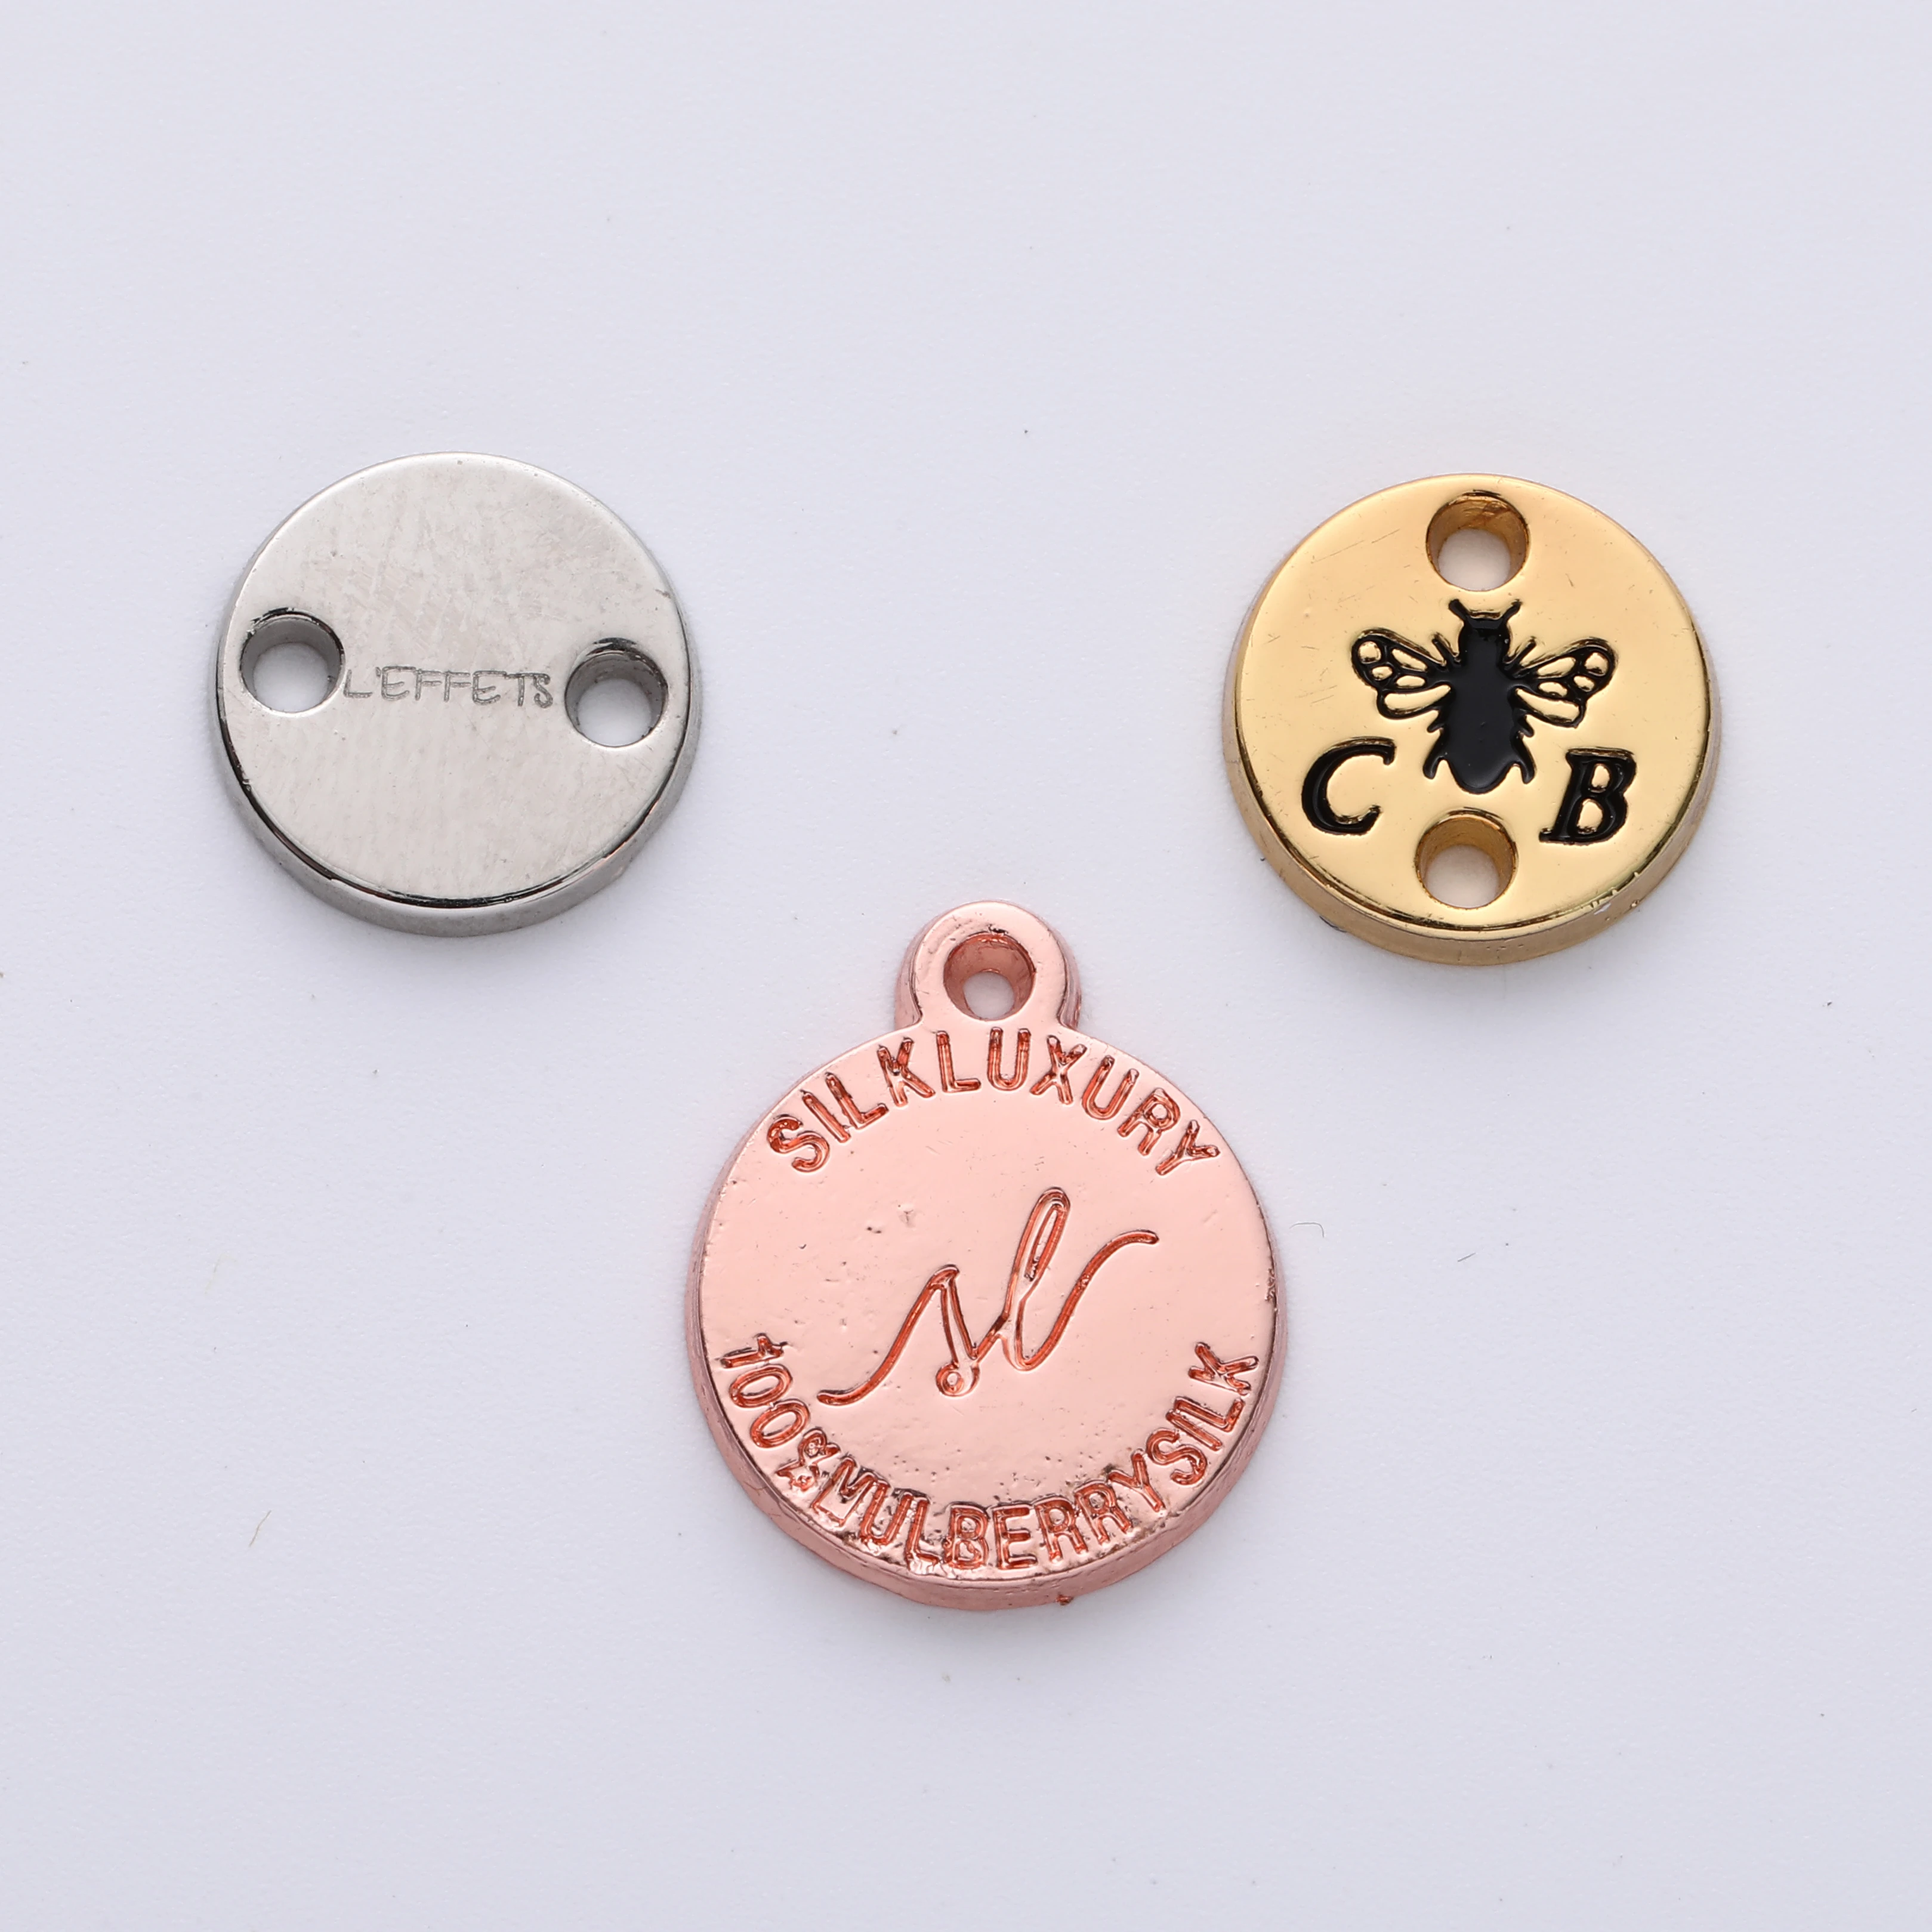 New metal accessories two holes sewing metal label clothing tag for swimwear